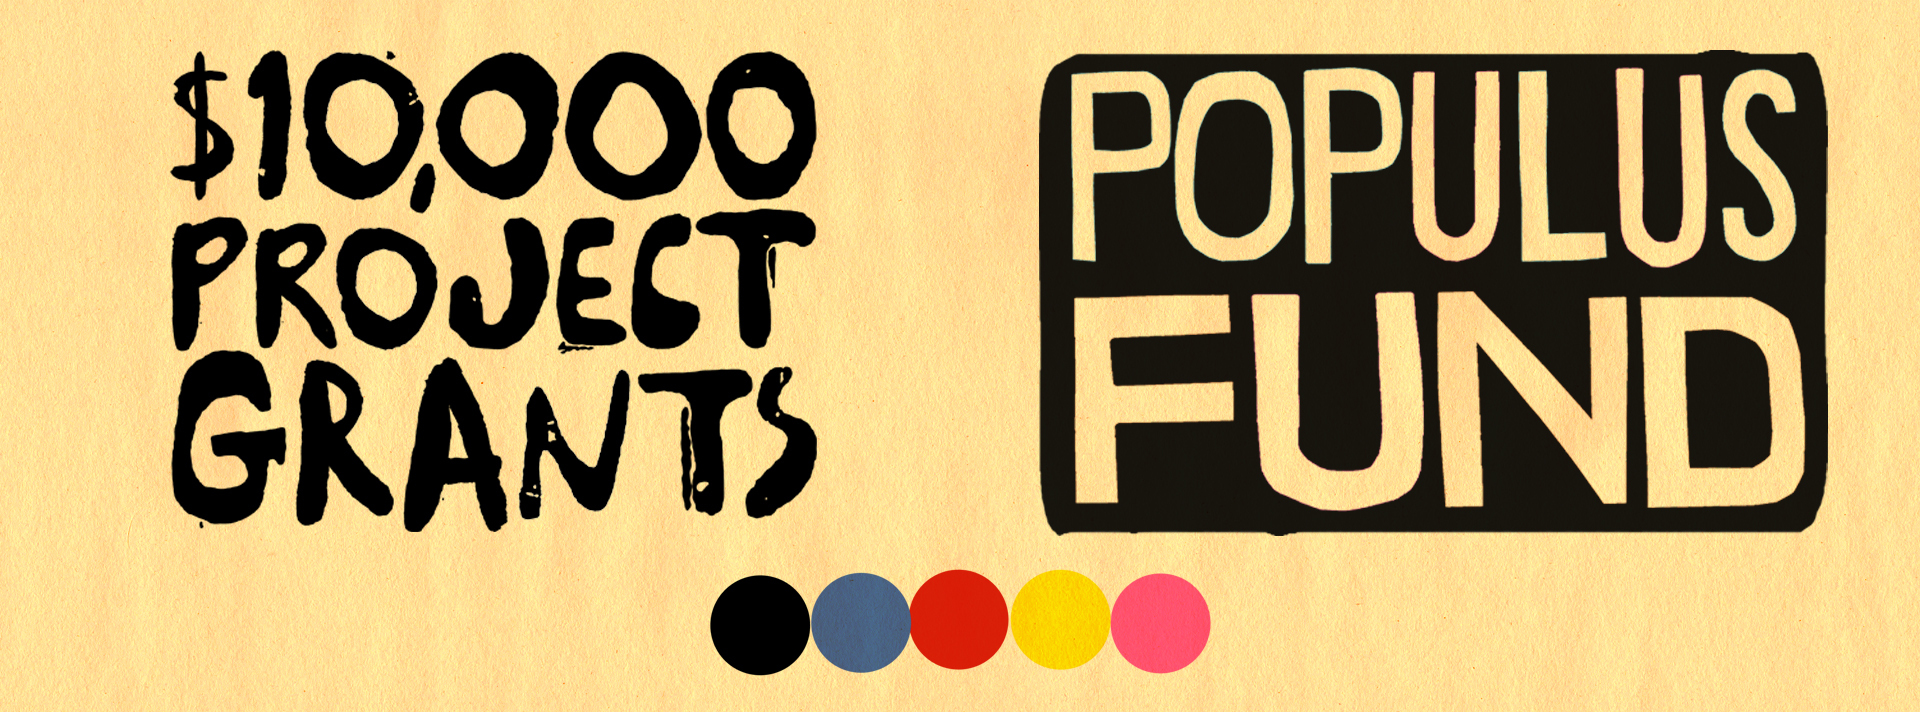 Populus Fund Banner 10000 Project Grants